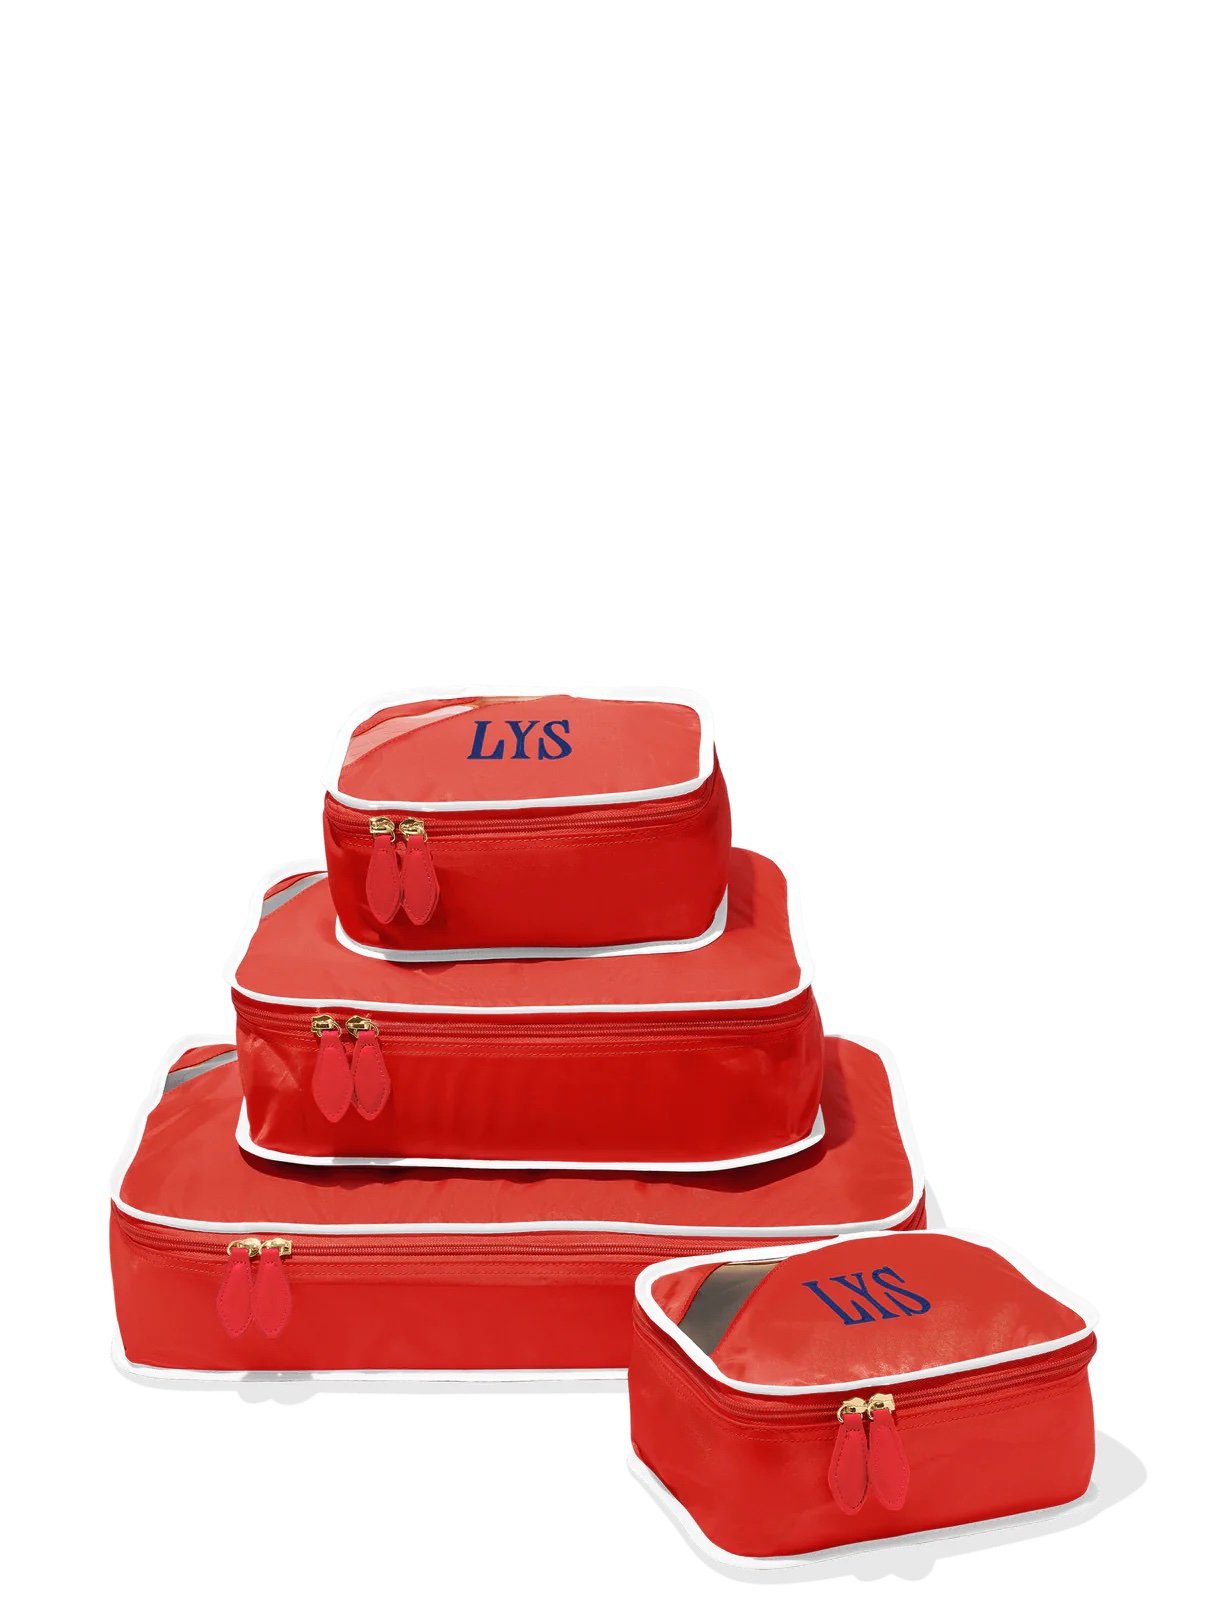 Paravel Packing Cubes